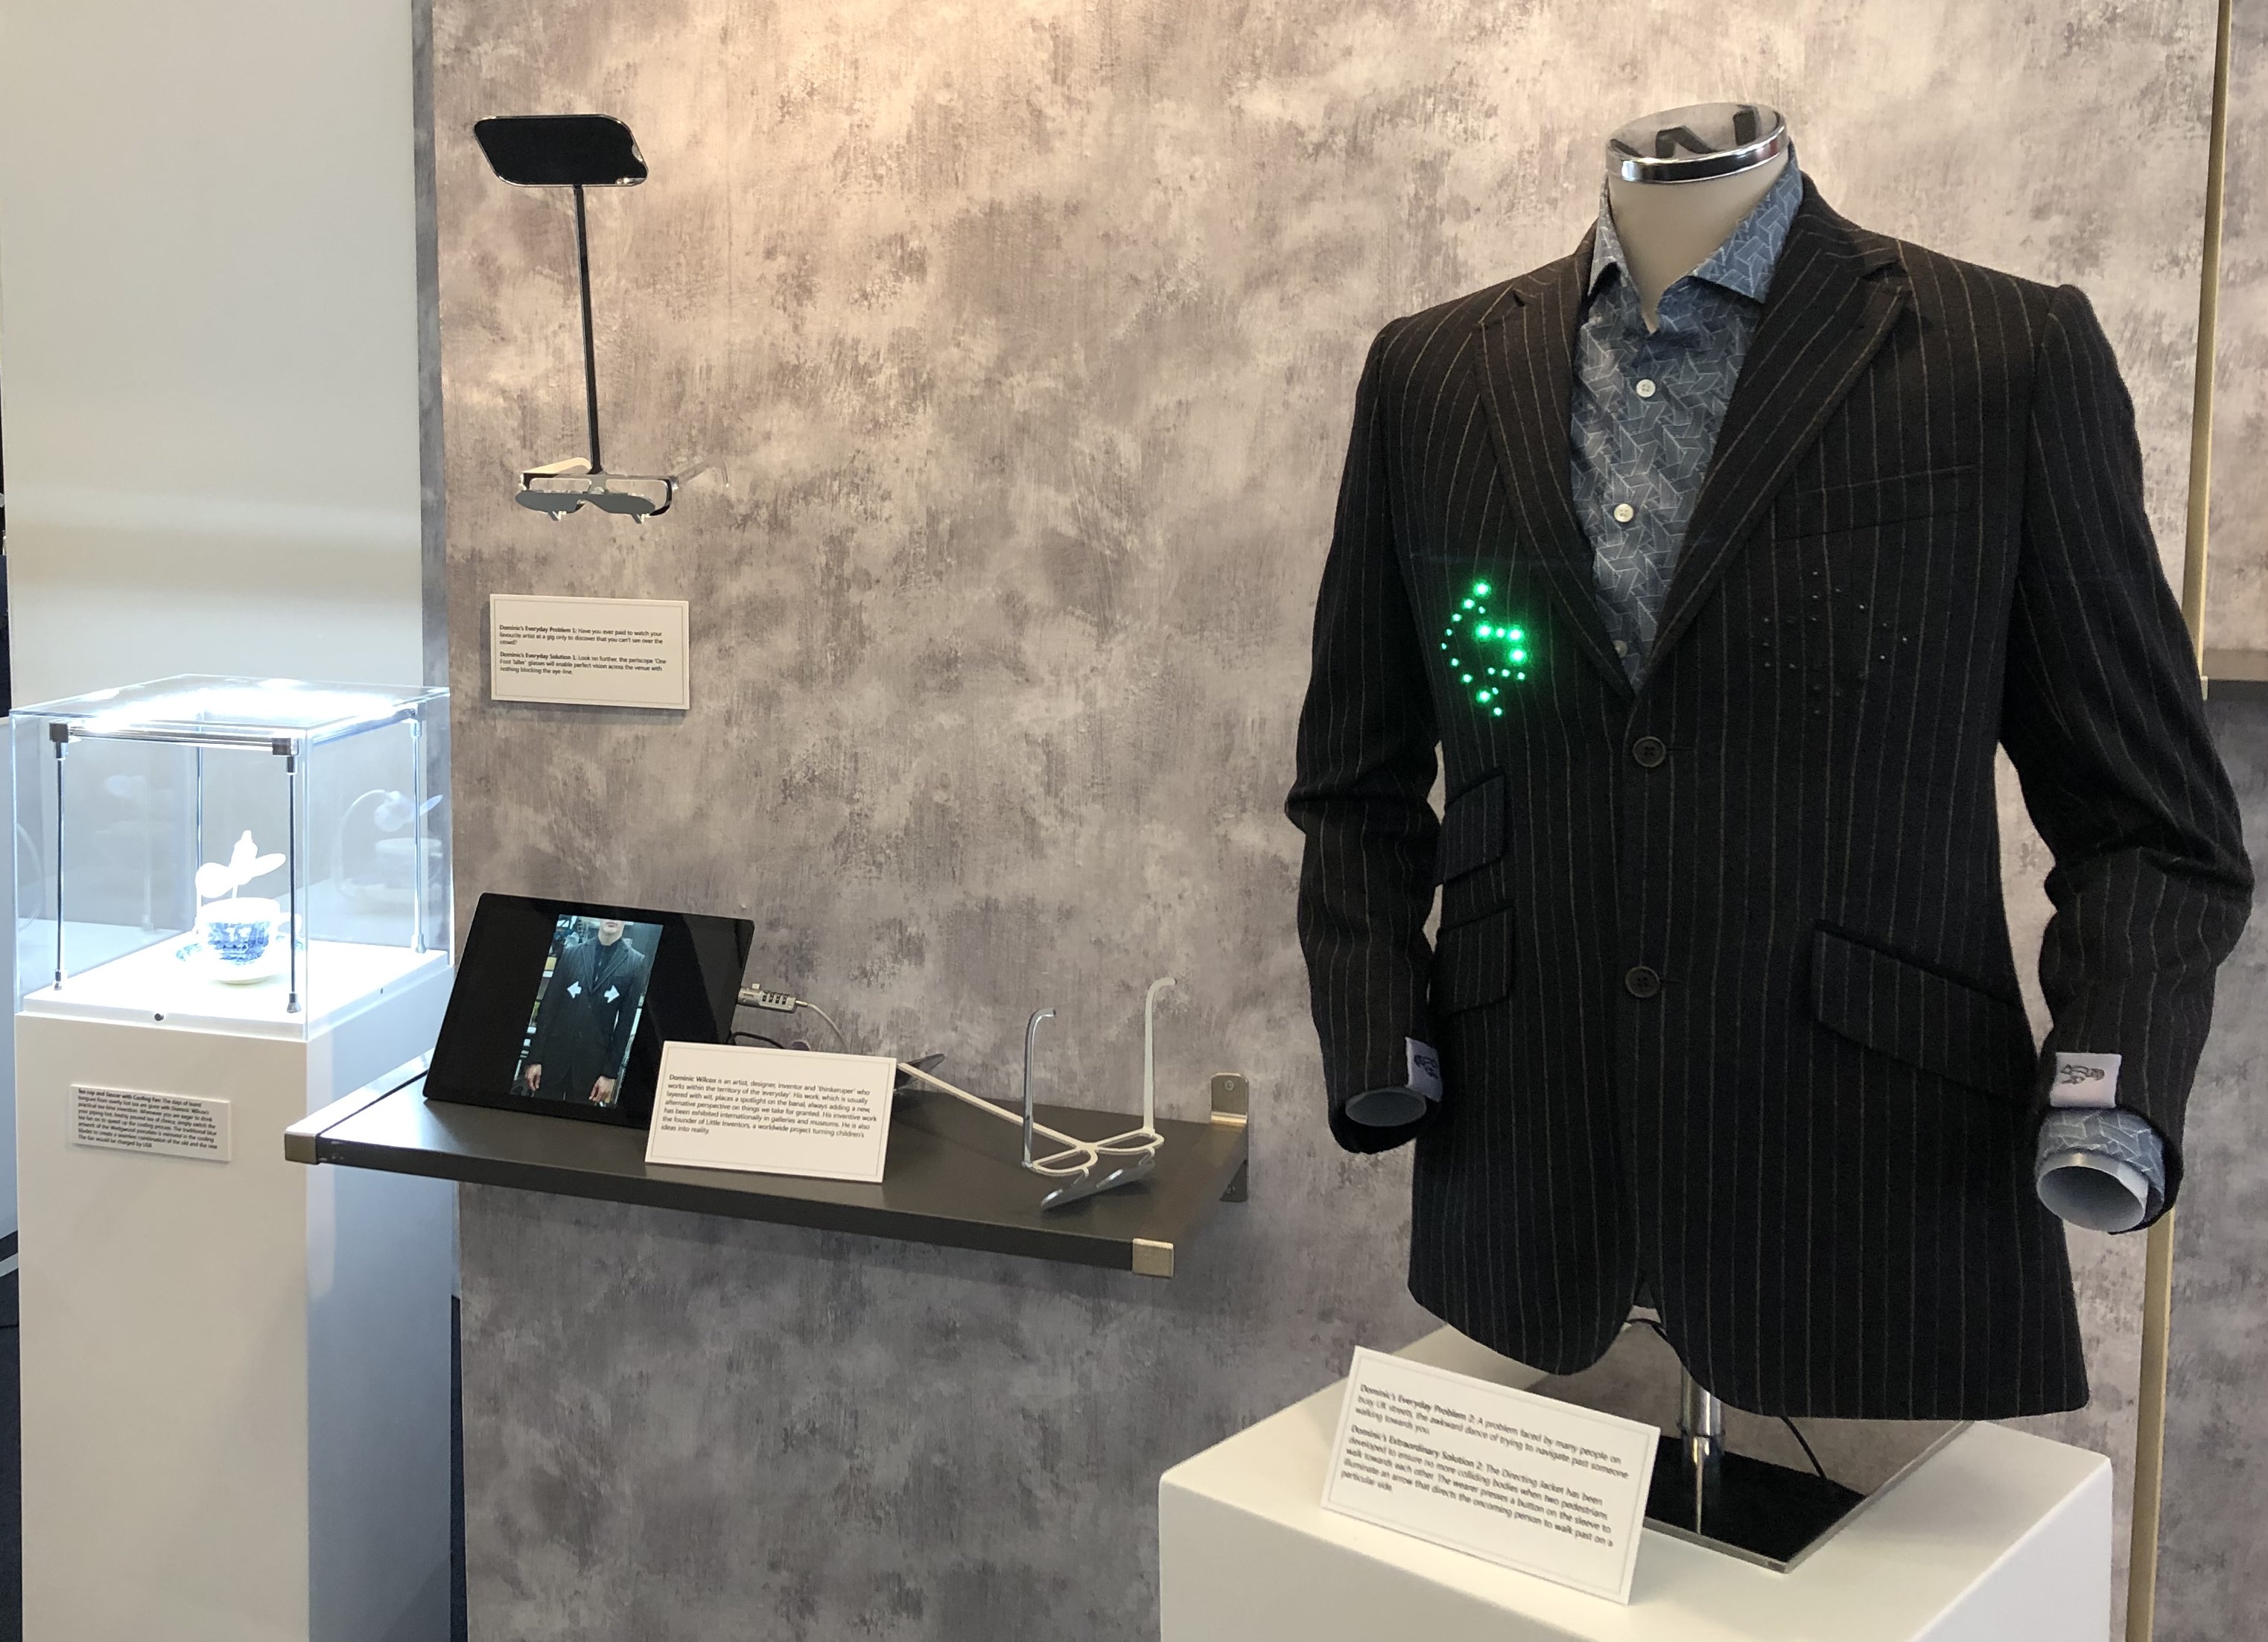 A jacket with indicators, designed by an inventor, on show at the D&AD Festival in London